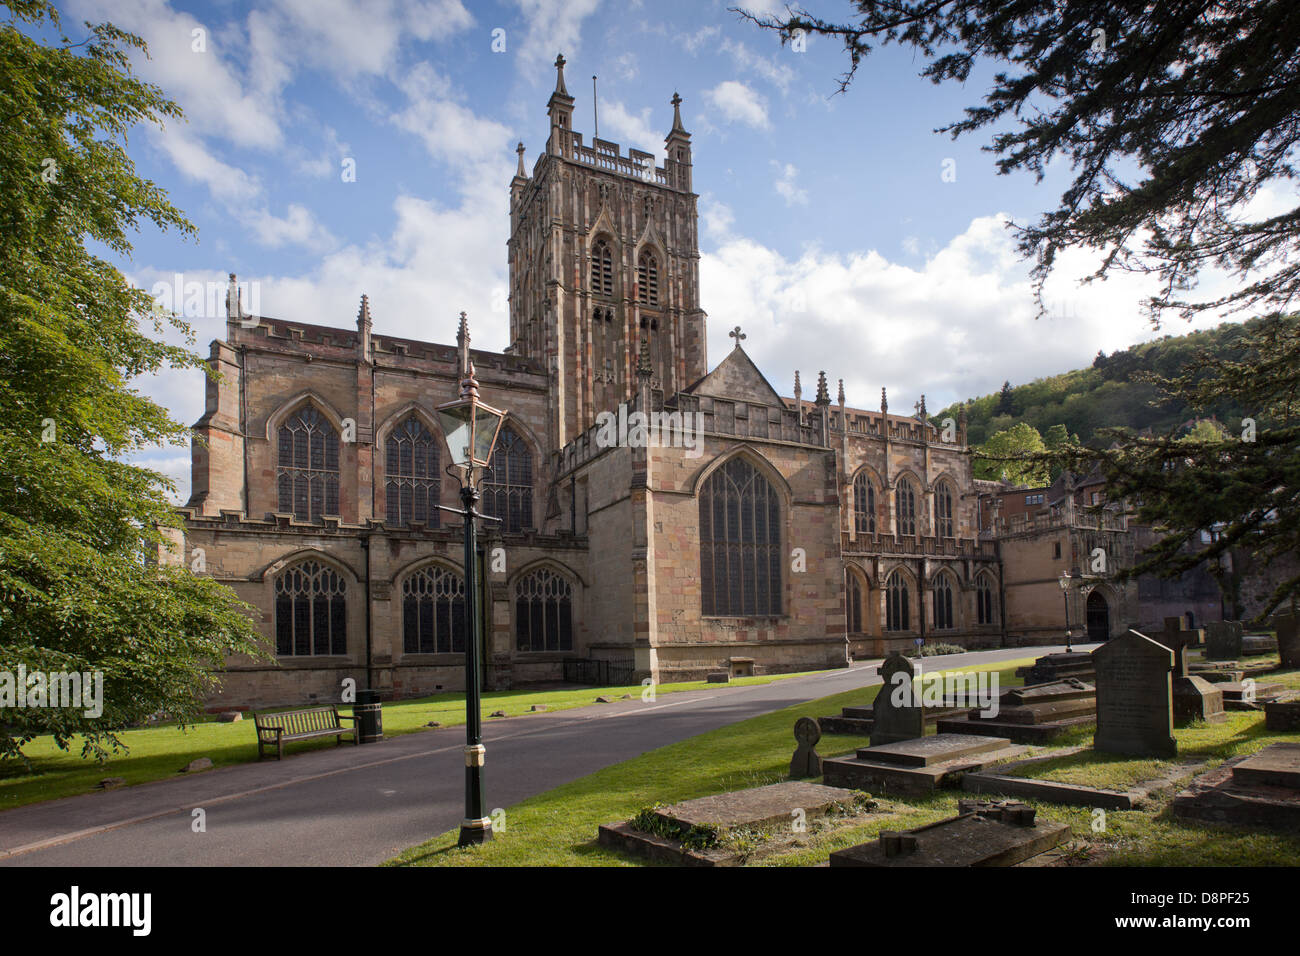 The priory at Great Malvern, Worcestershire Stock Photo